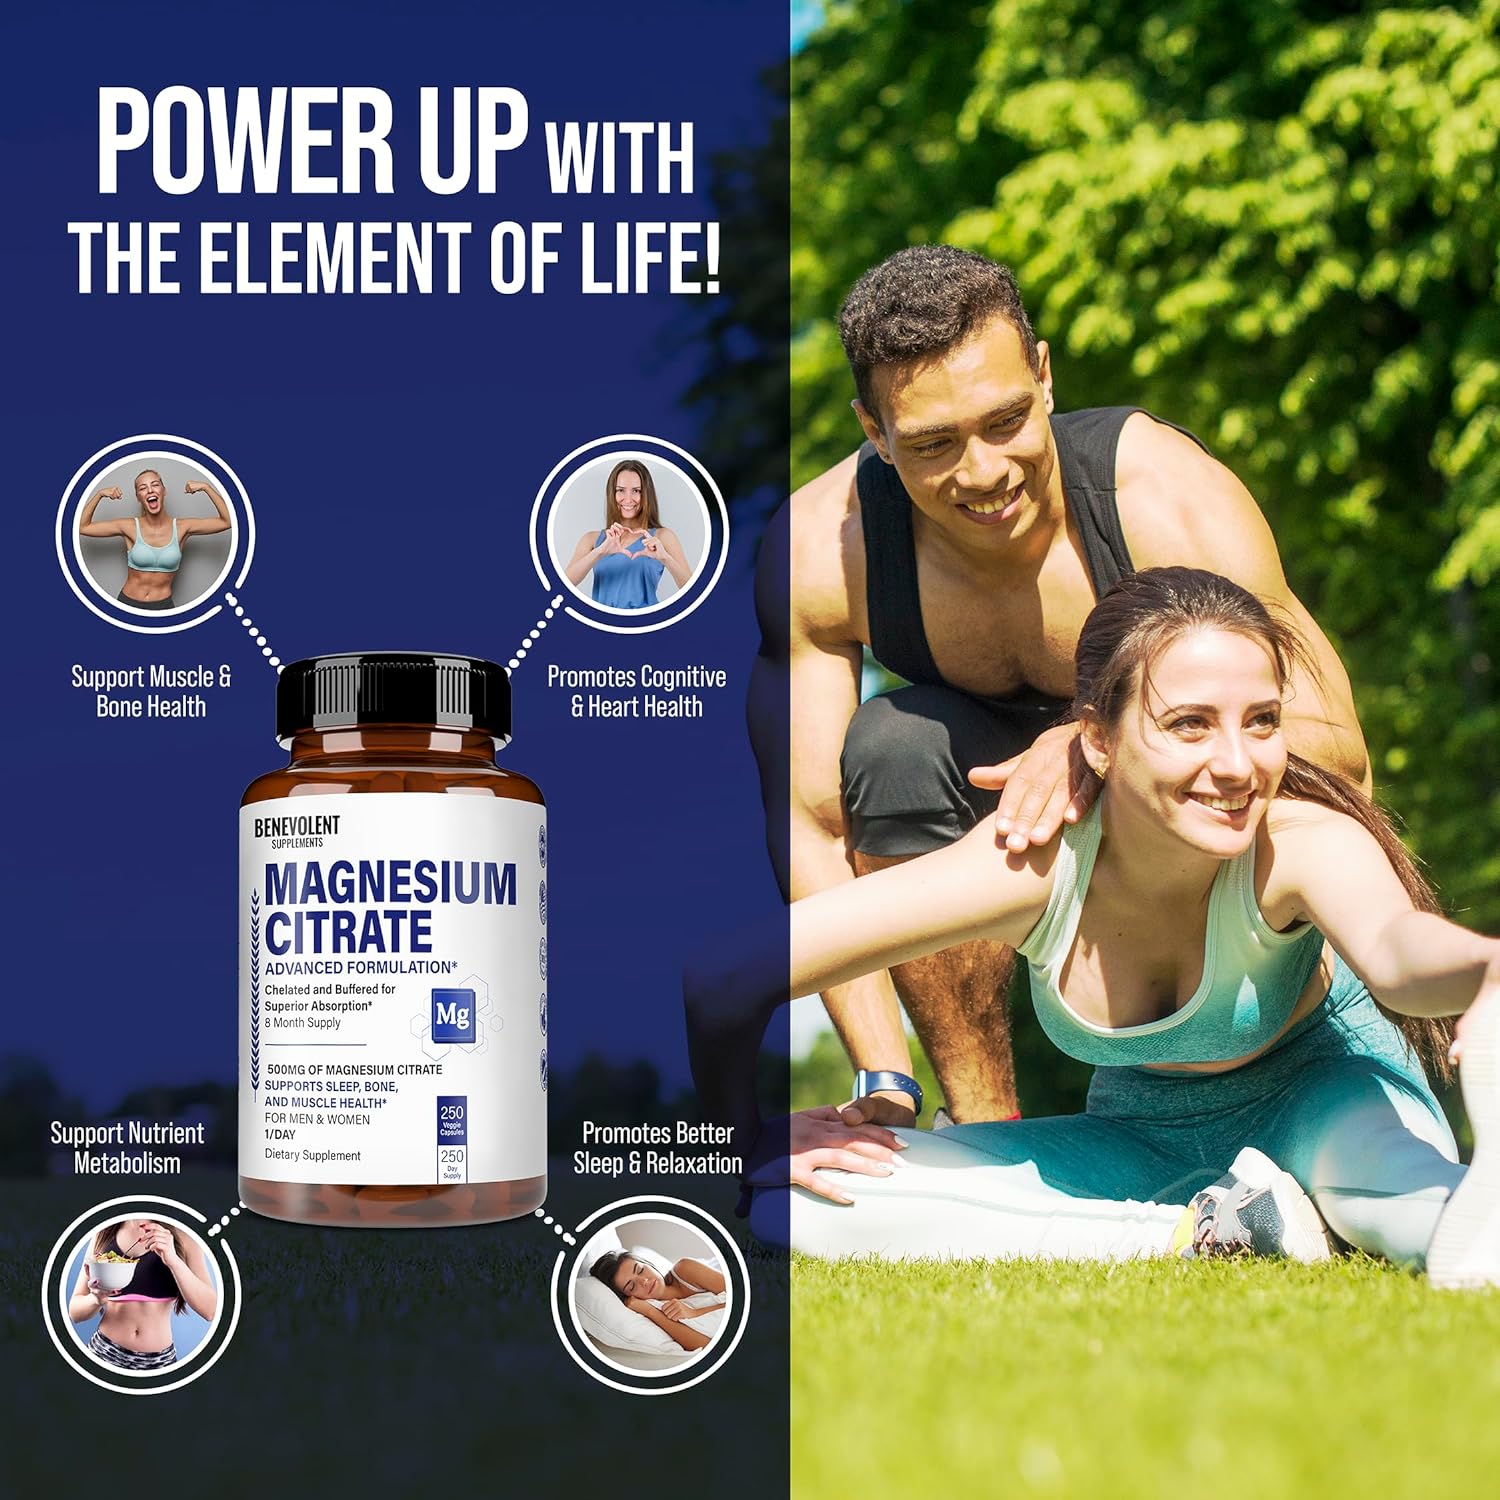 Power up with the element of life